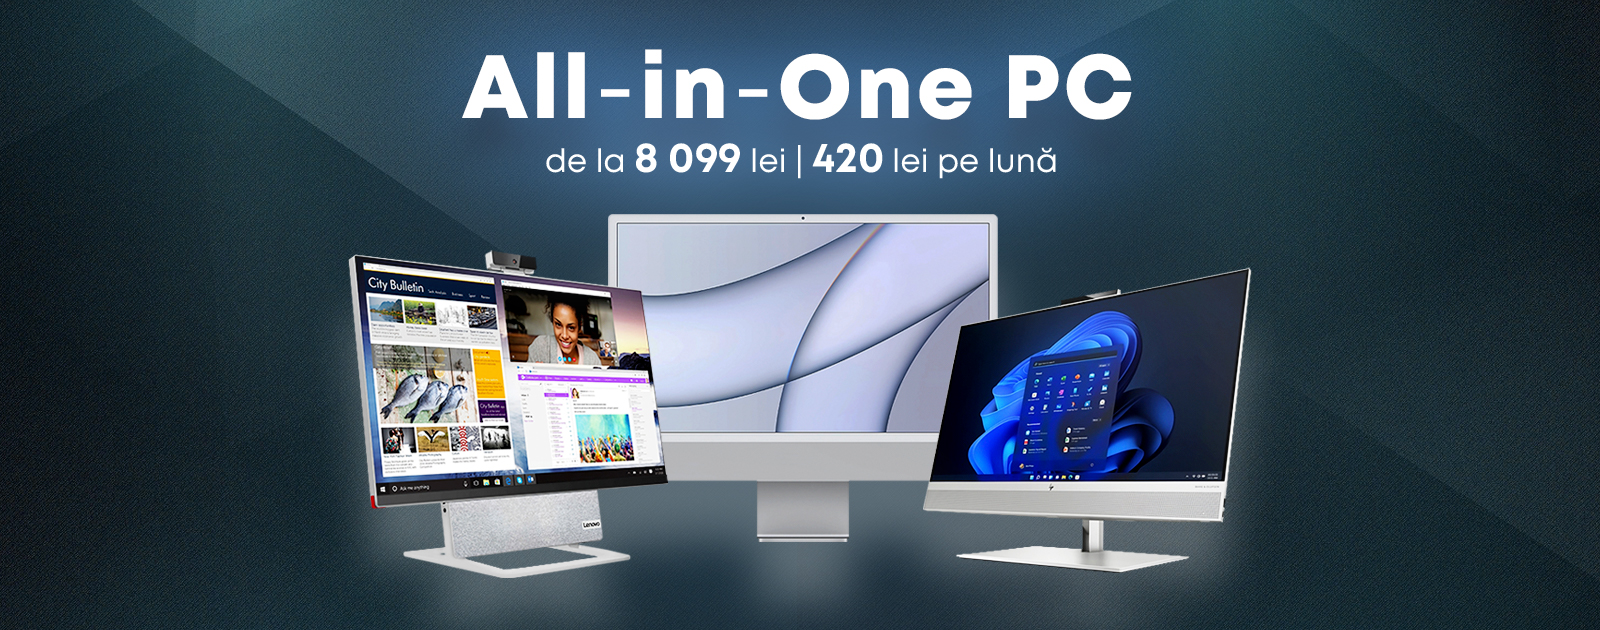 slide  All-in-One PC  xstore